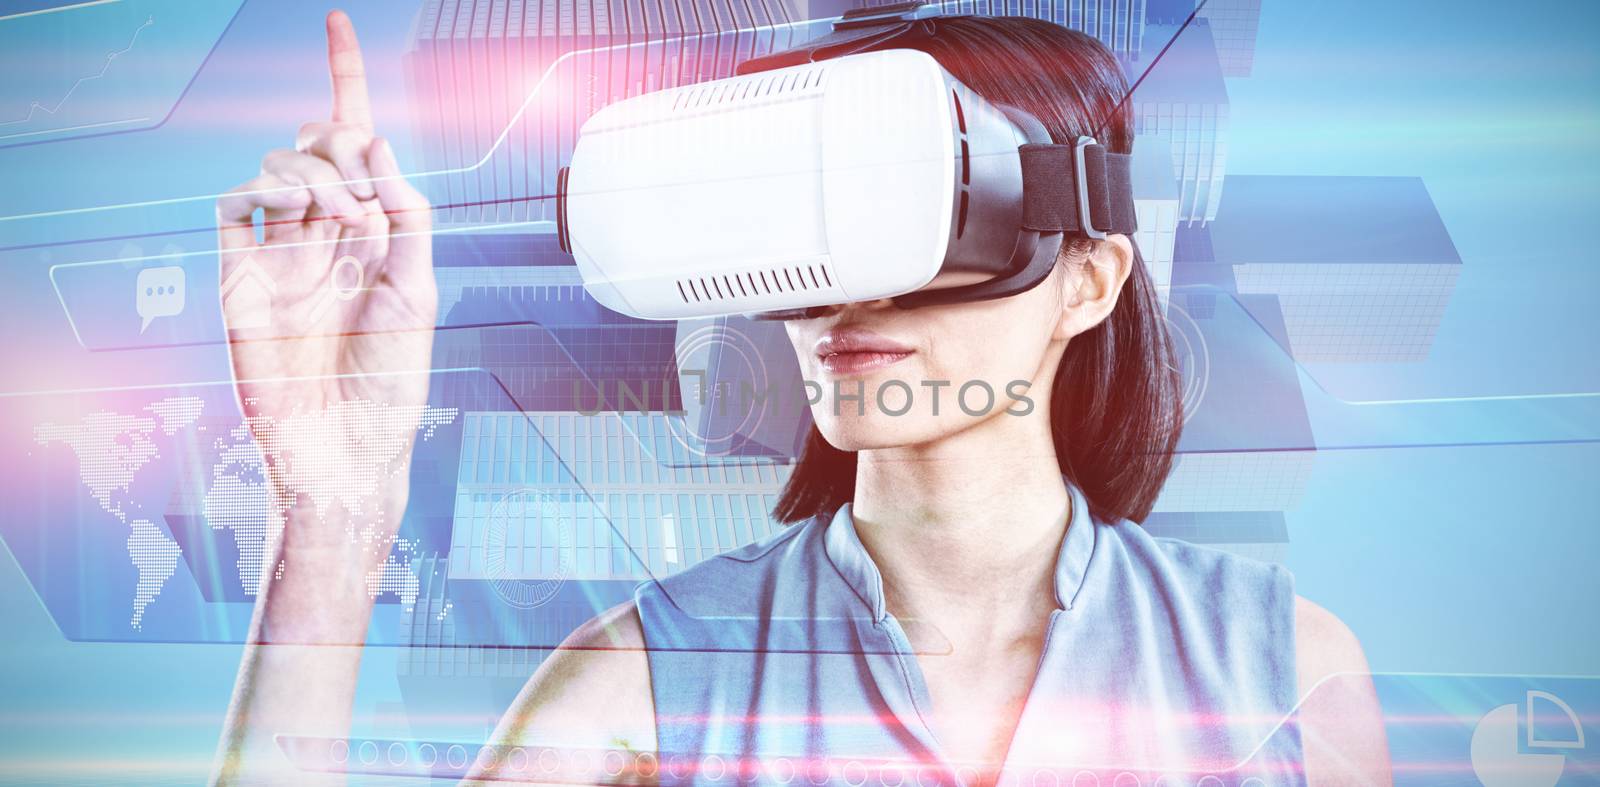 Composite image of female executive gesturing while using virtual reality headset by Wavebreakmedia